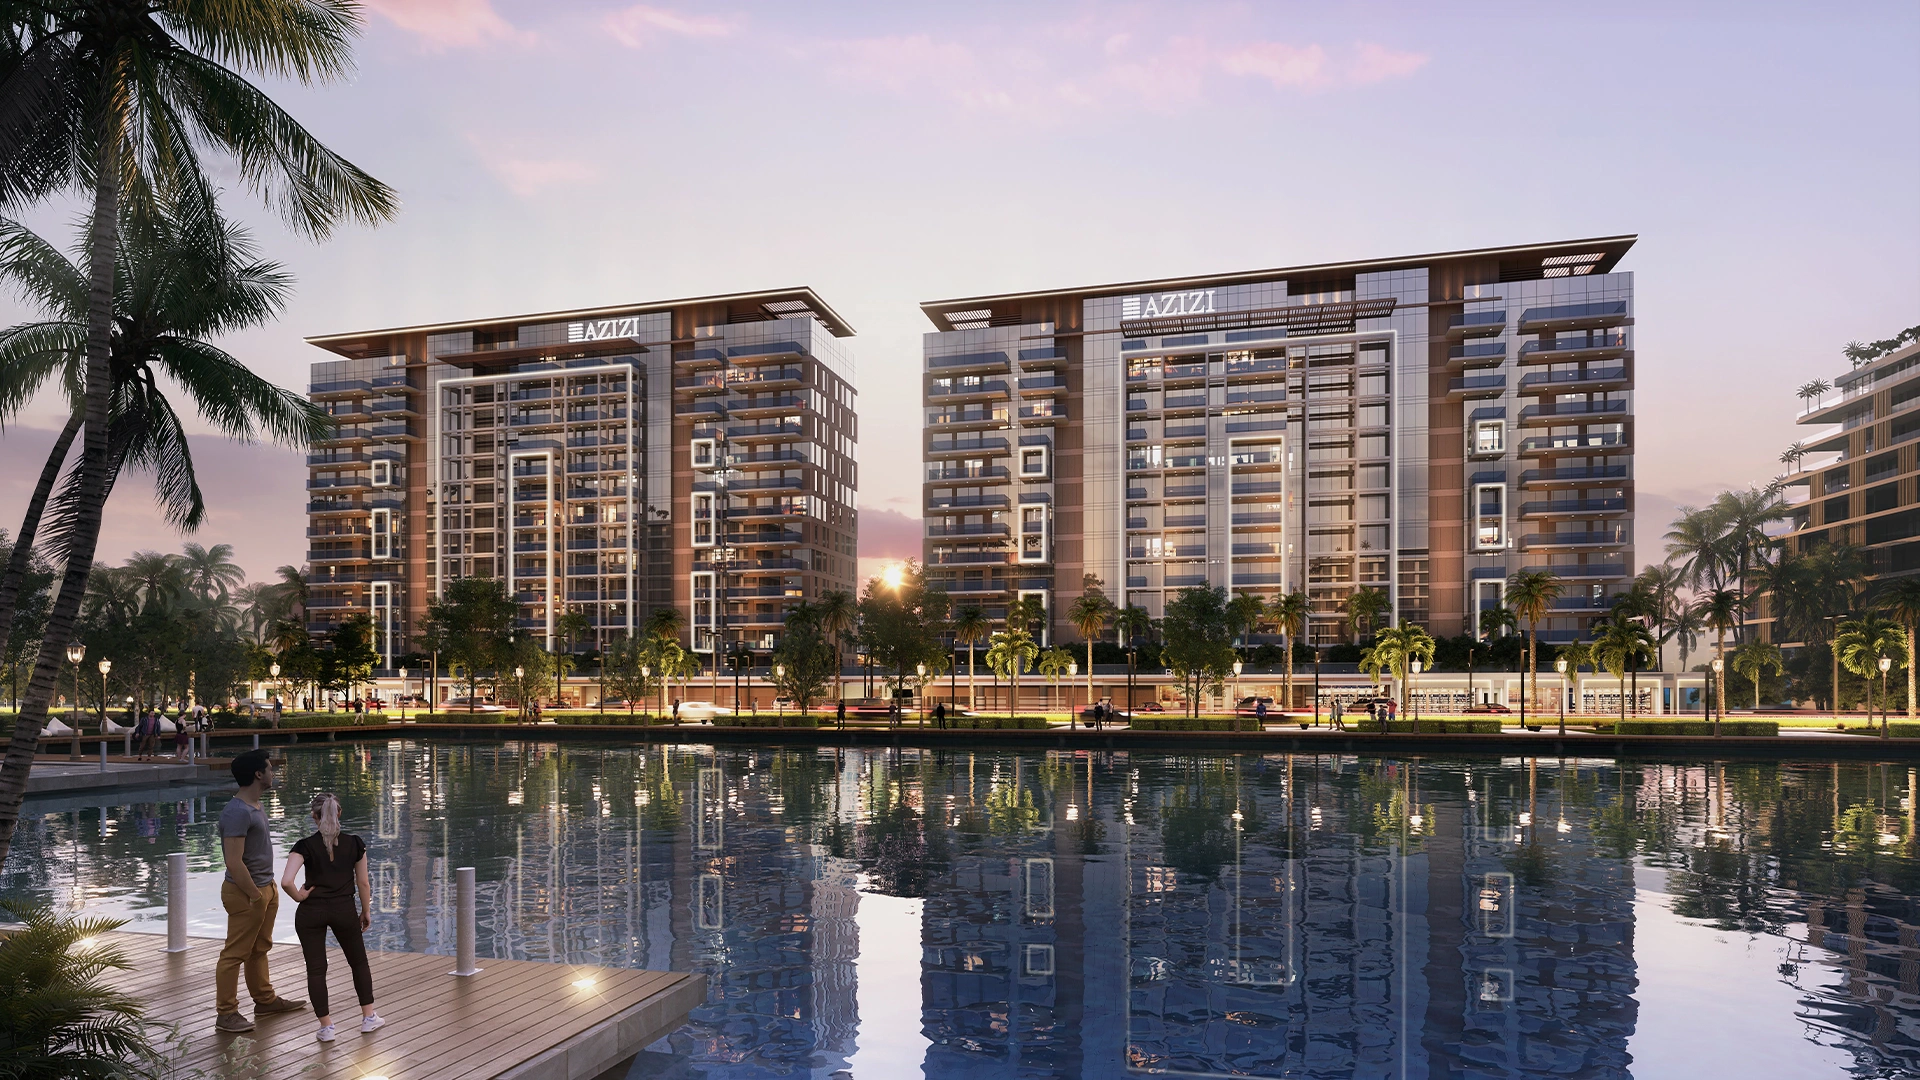 Located in Dubai South, Azizi Venice offers more than just a development; it presents a luxurious world featuring a vibrant retail promenade and entertainment.